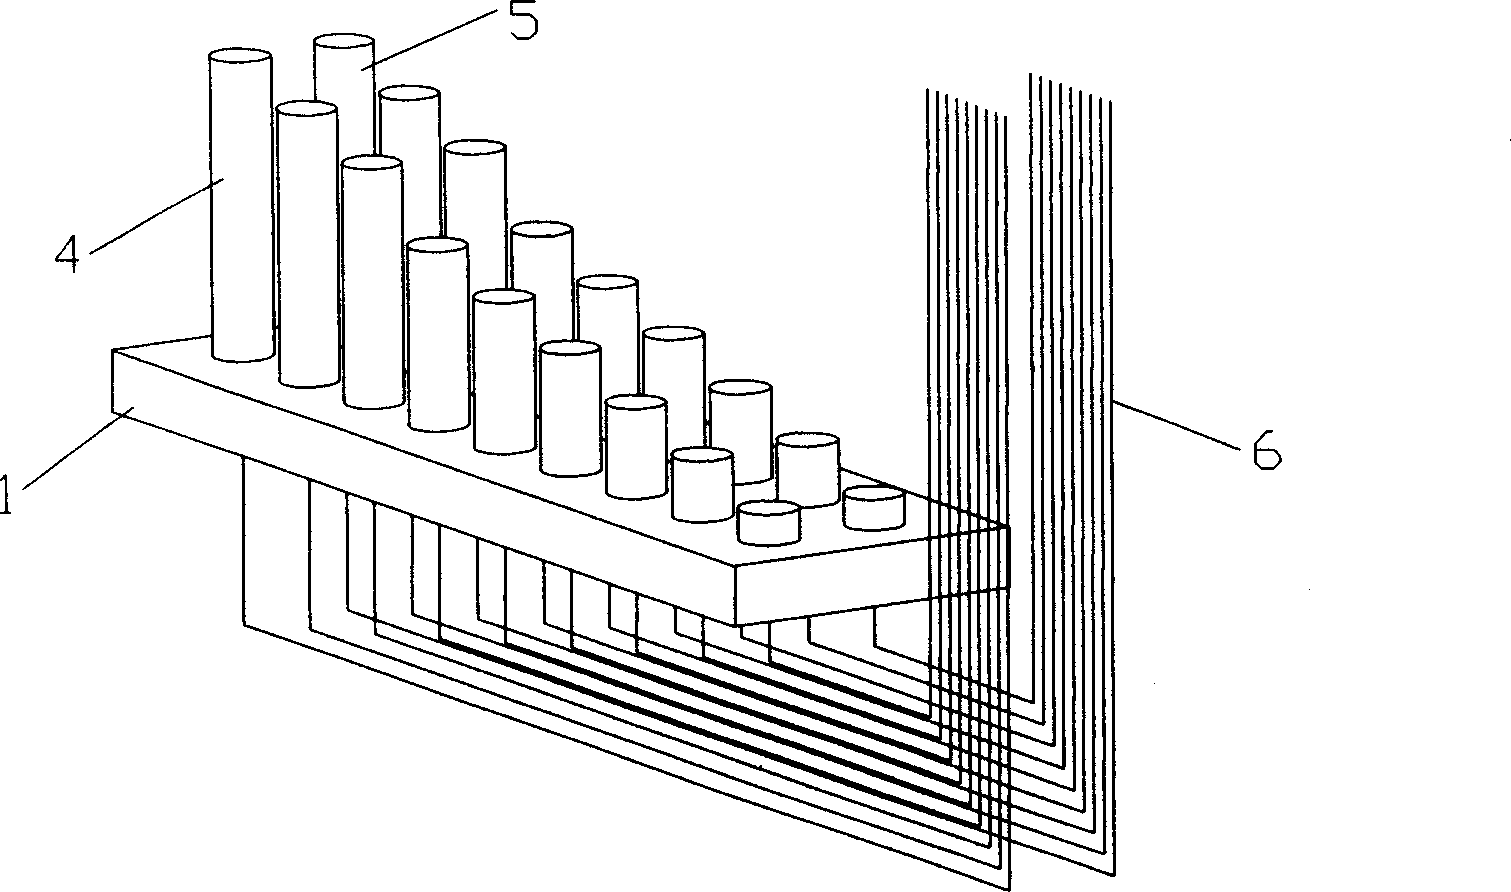 Method for detecting corrosion of concrete bar in reinforced concrete